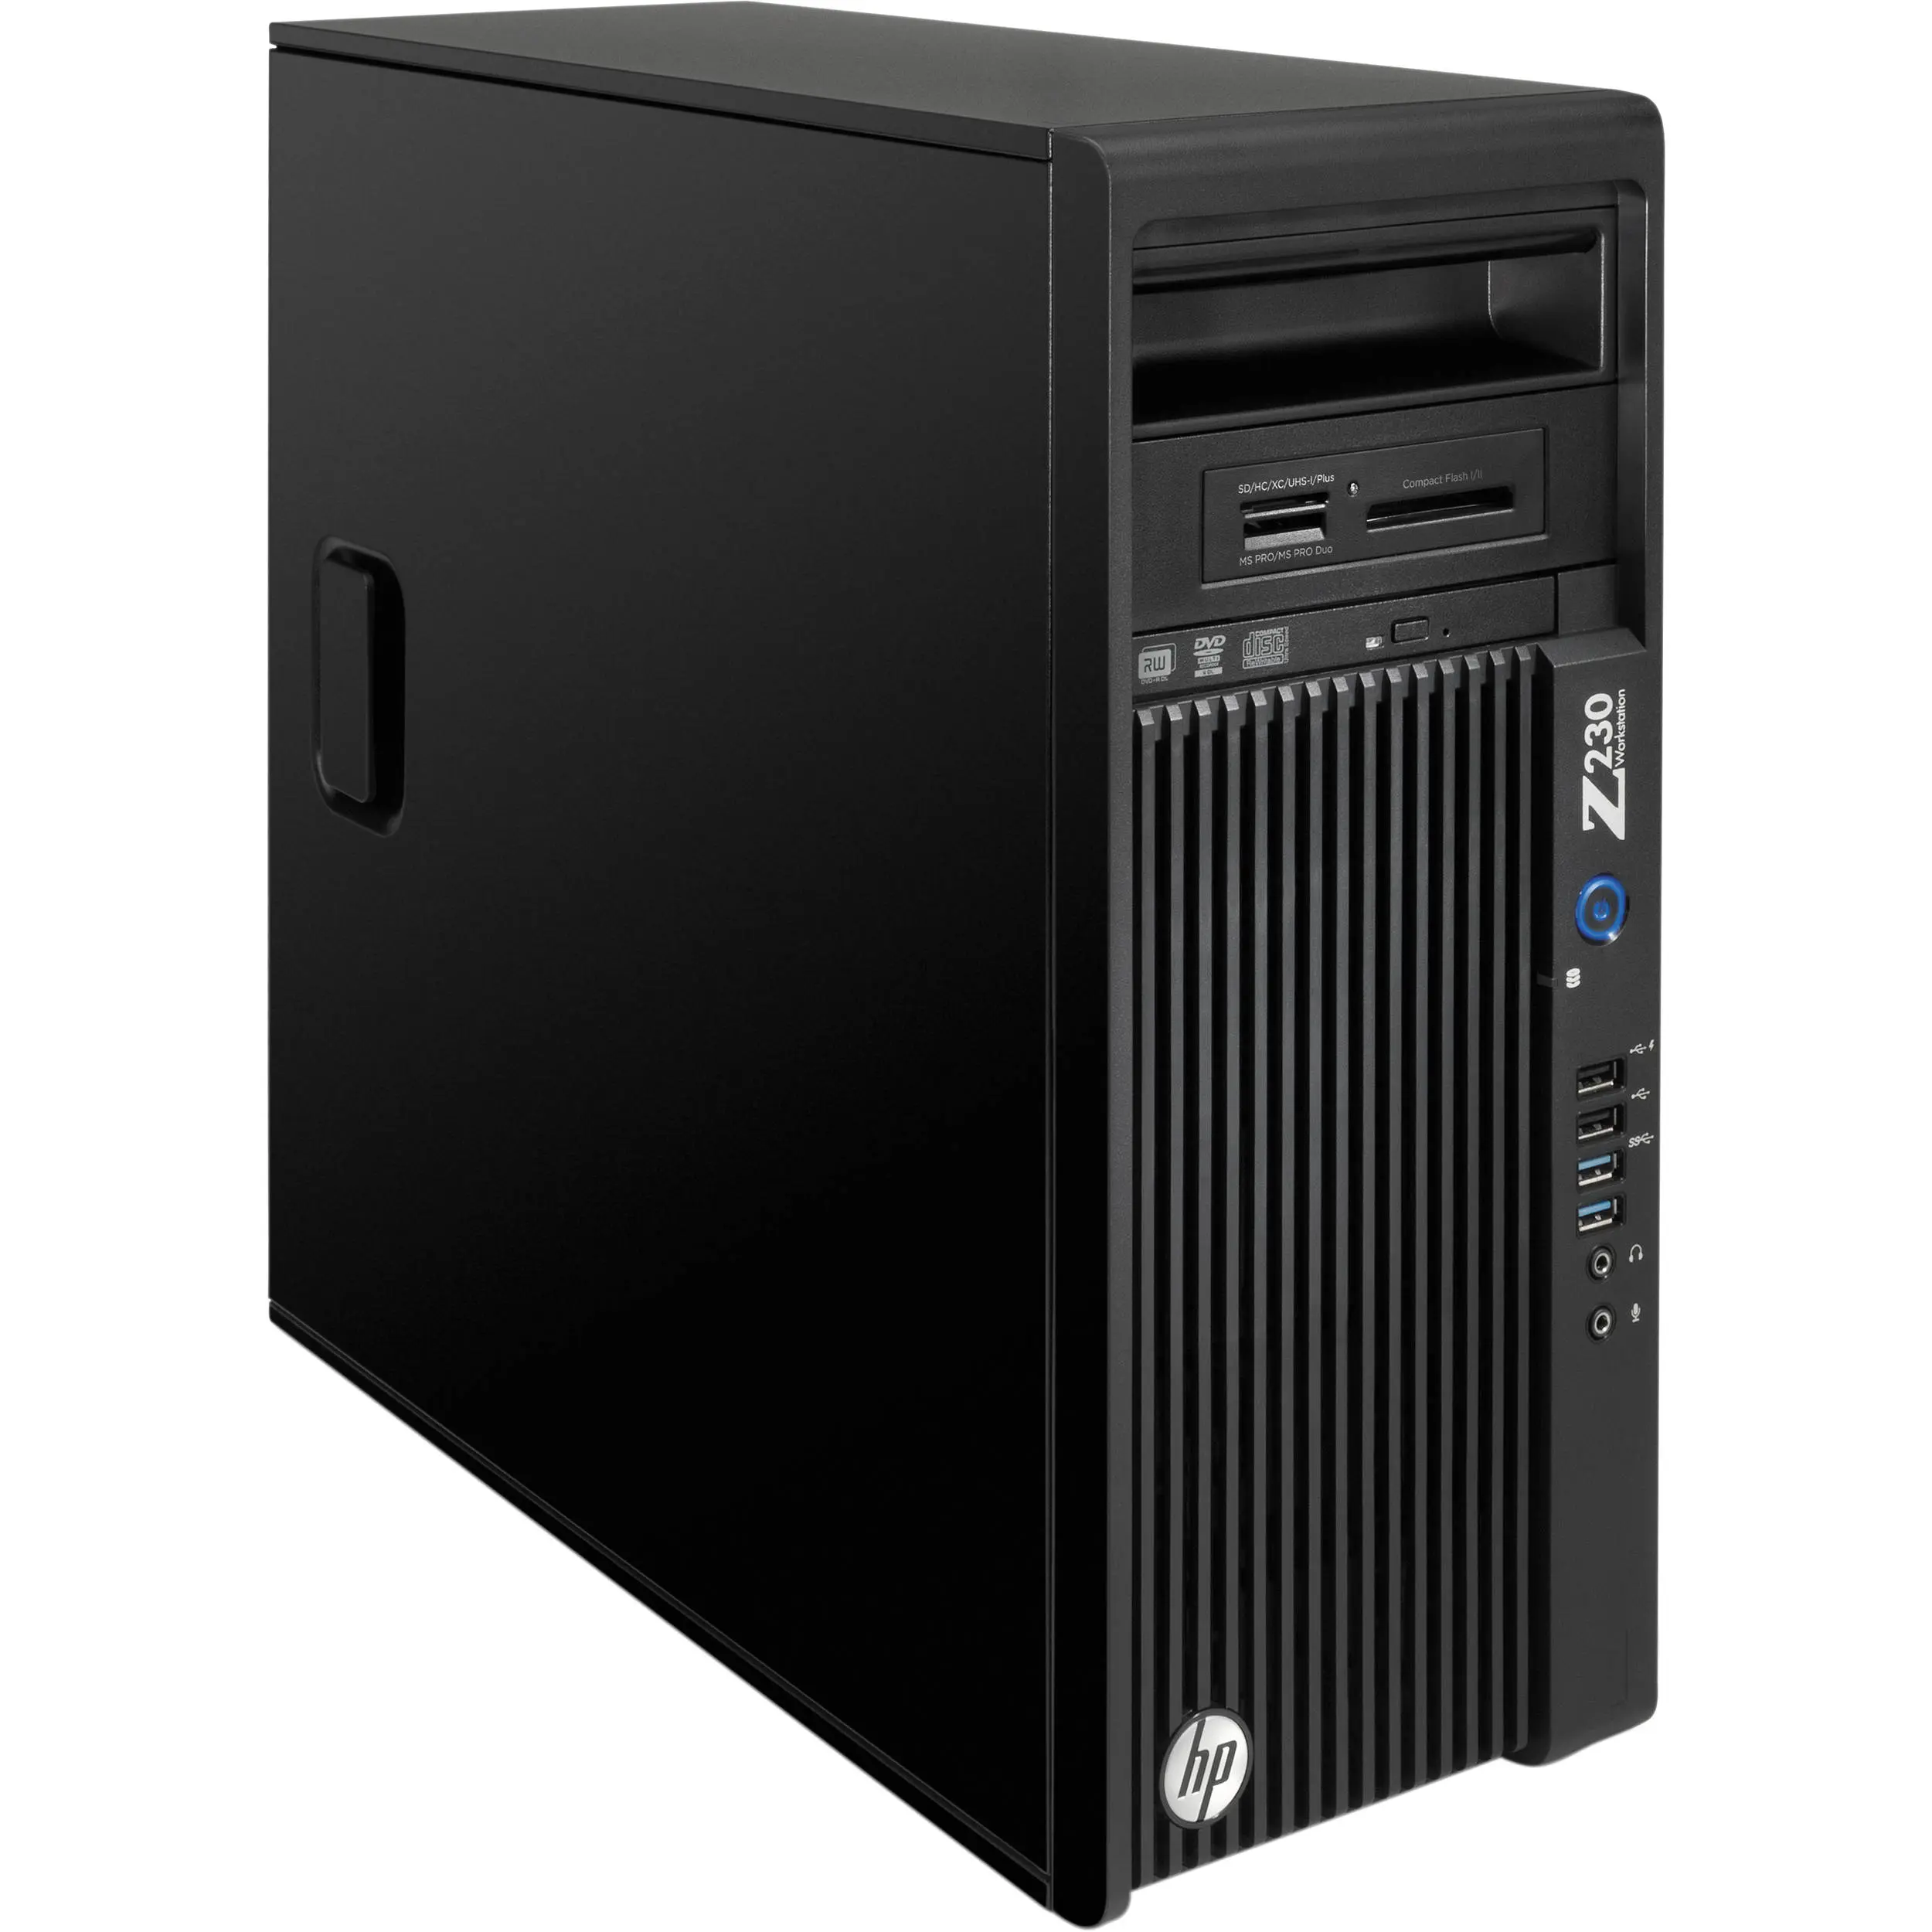 hewlett-packard hp z230 tower workstation - Is HP Z230 workstation good for gaming